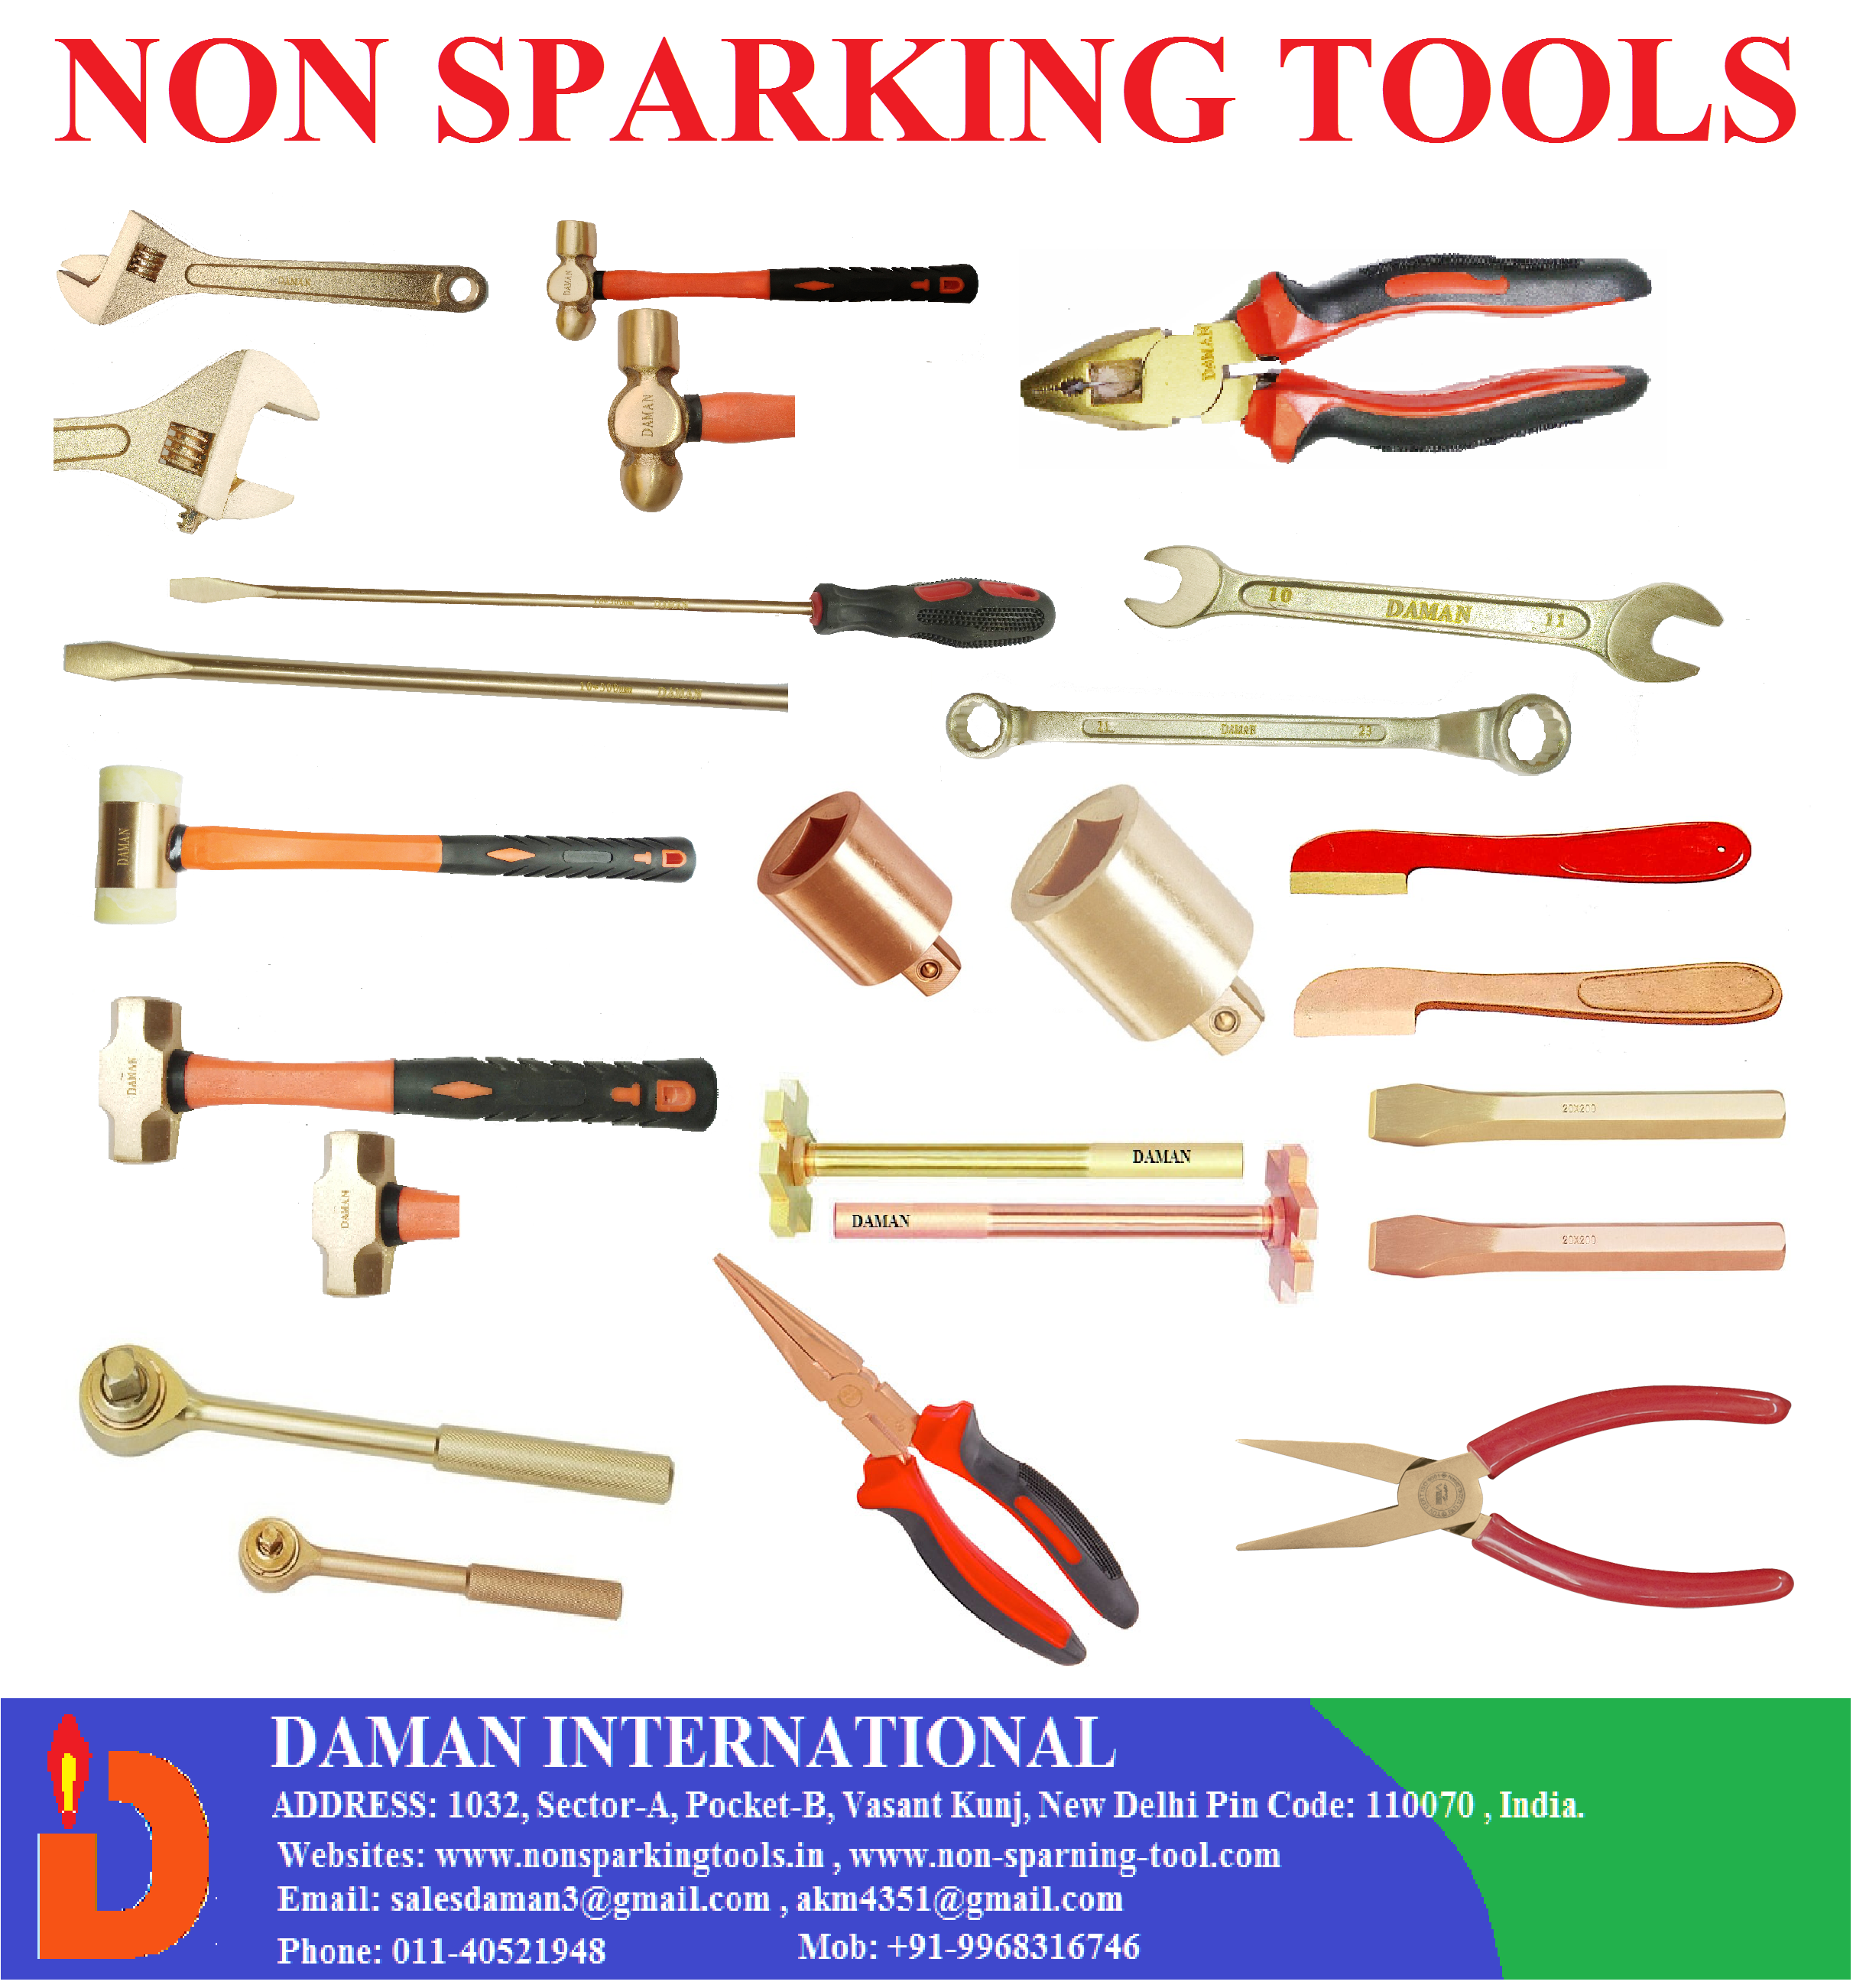 Инструмент Spark. Non Spark Tools Aviation. Die Tools Manufacturing. Spark tools